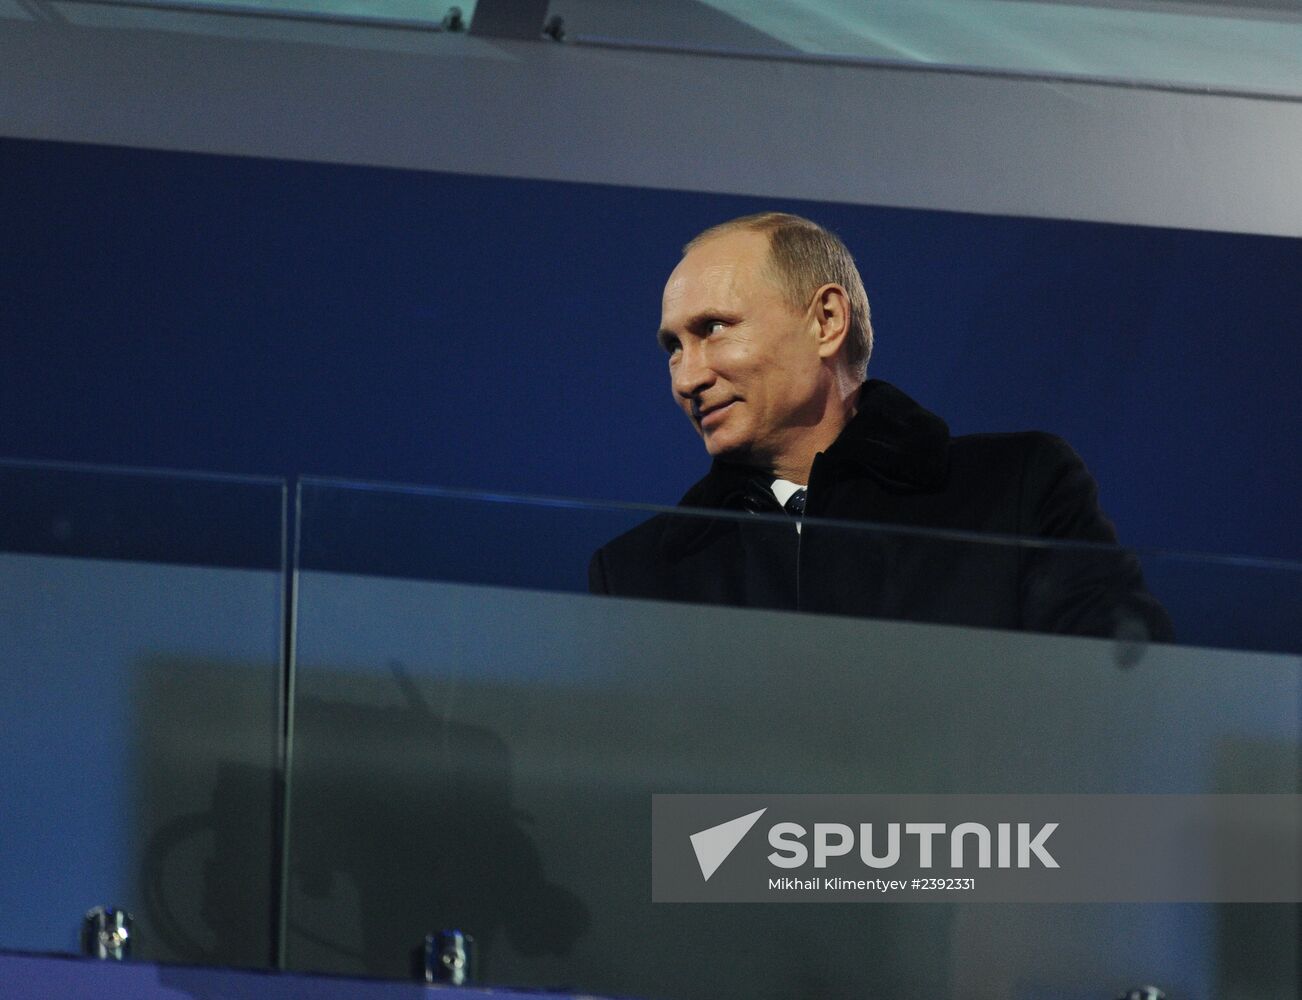 Putin at the opening ceremony of the Sochi 2014 Winter Paralympic Games